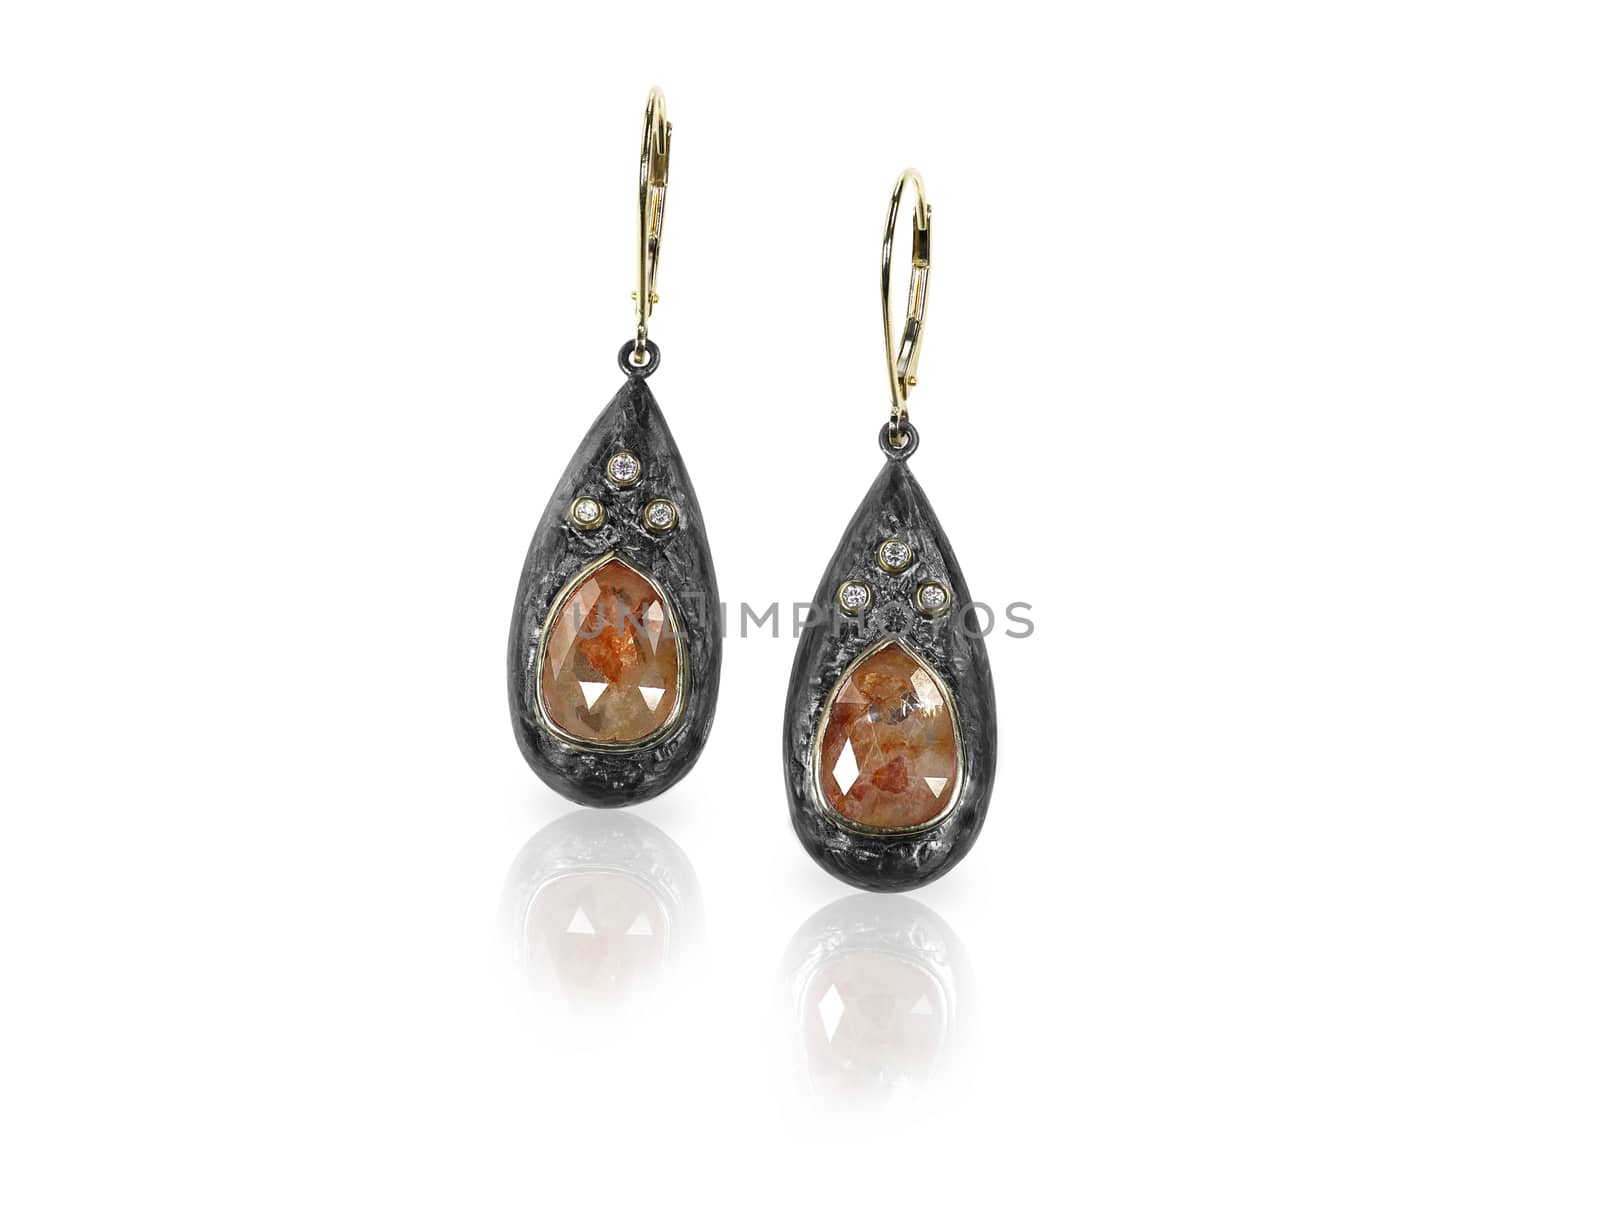 Beautiful brown diamond chocolate diamond earrings isolated on white with a reflection. 